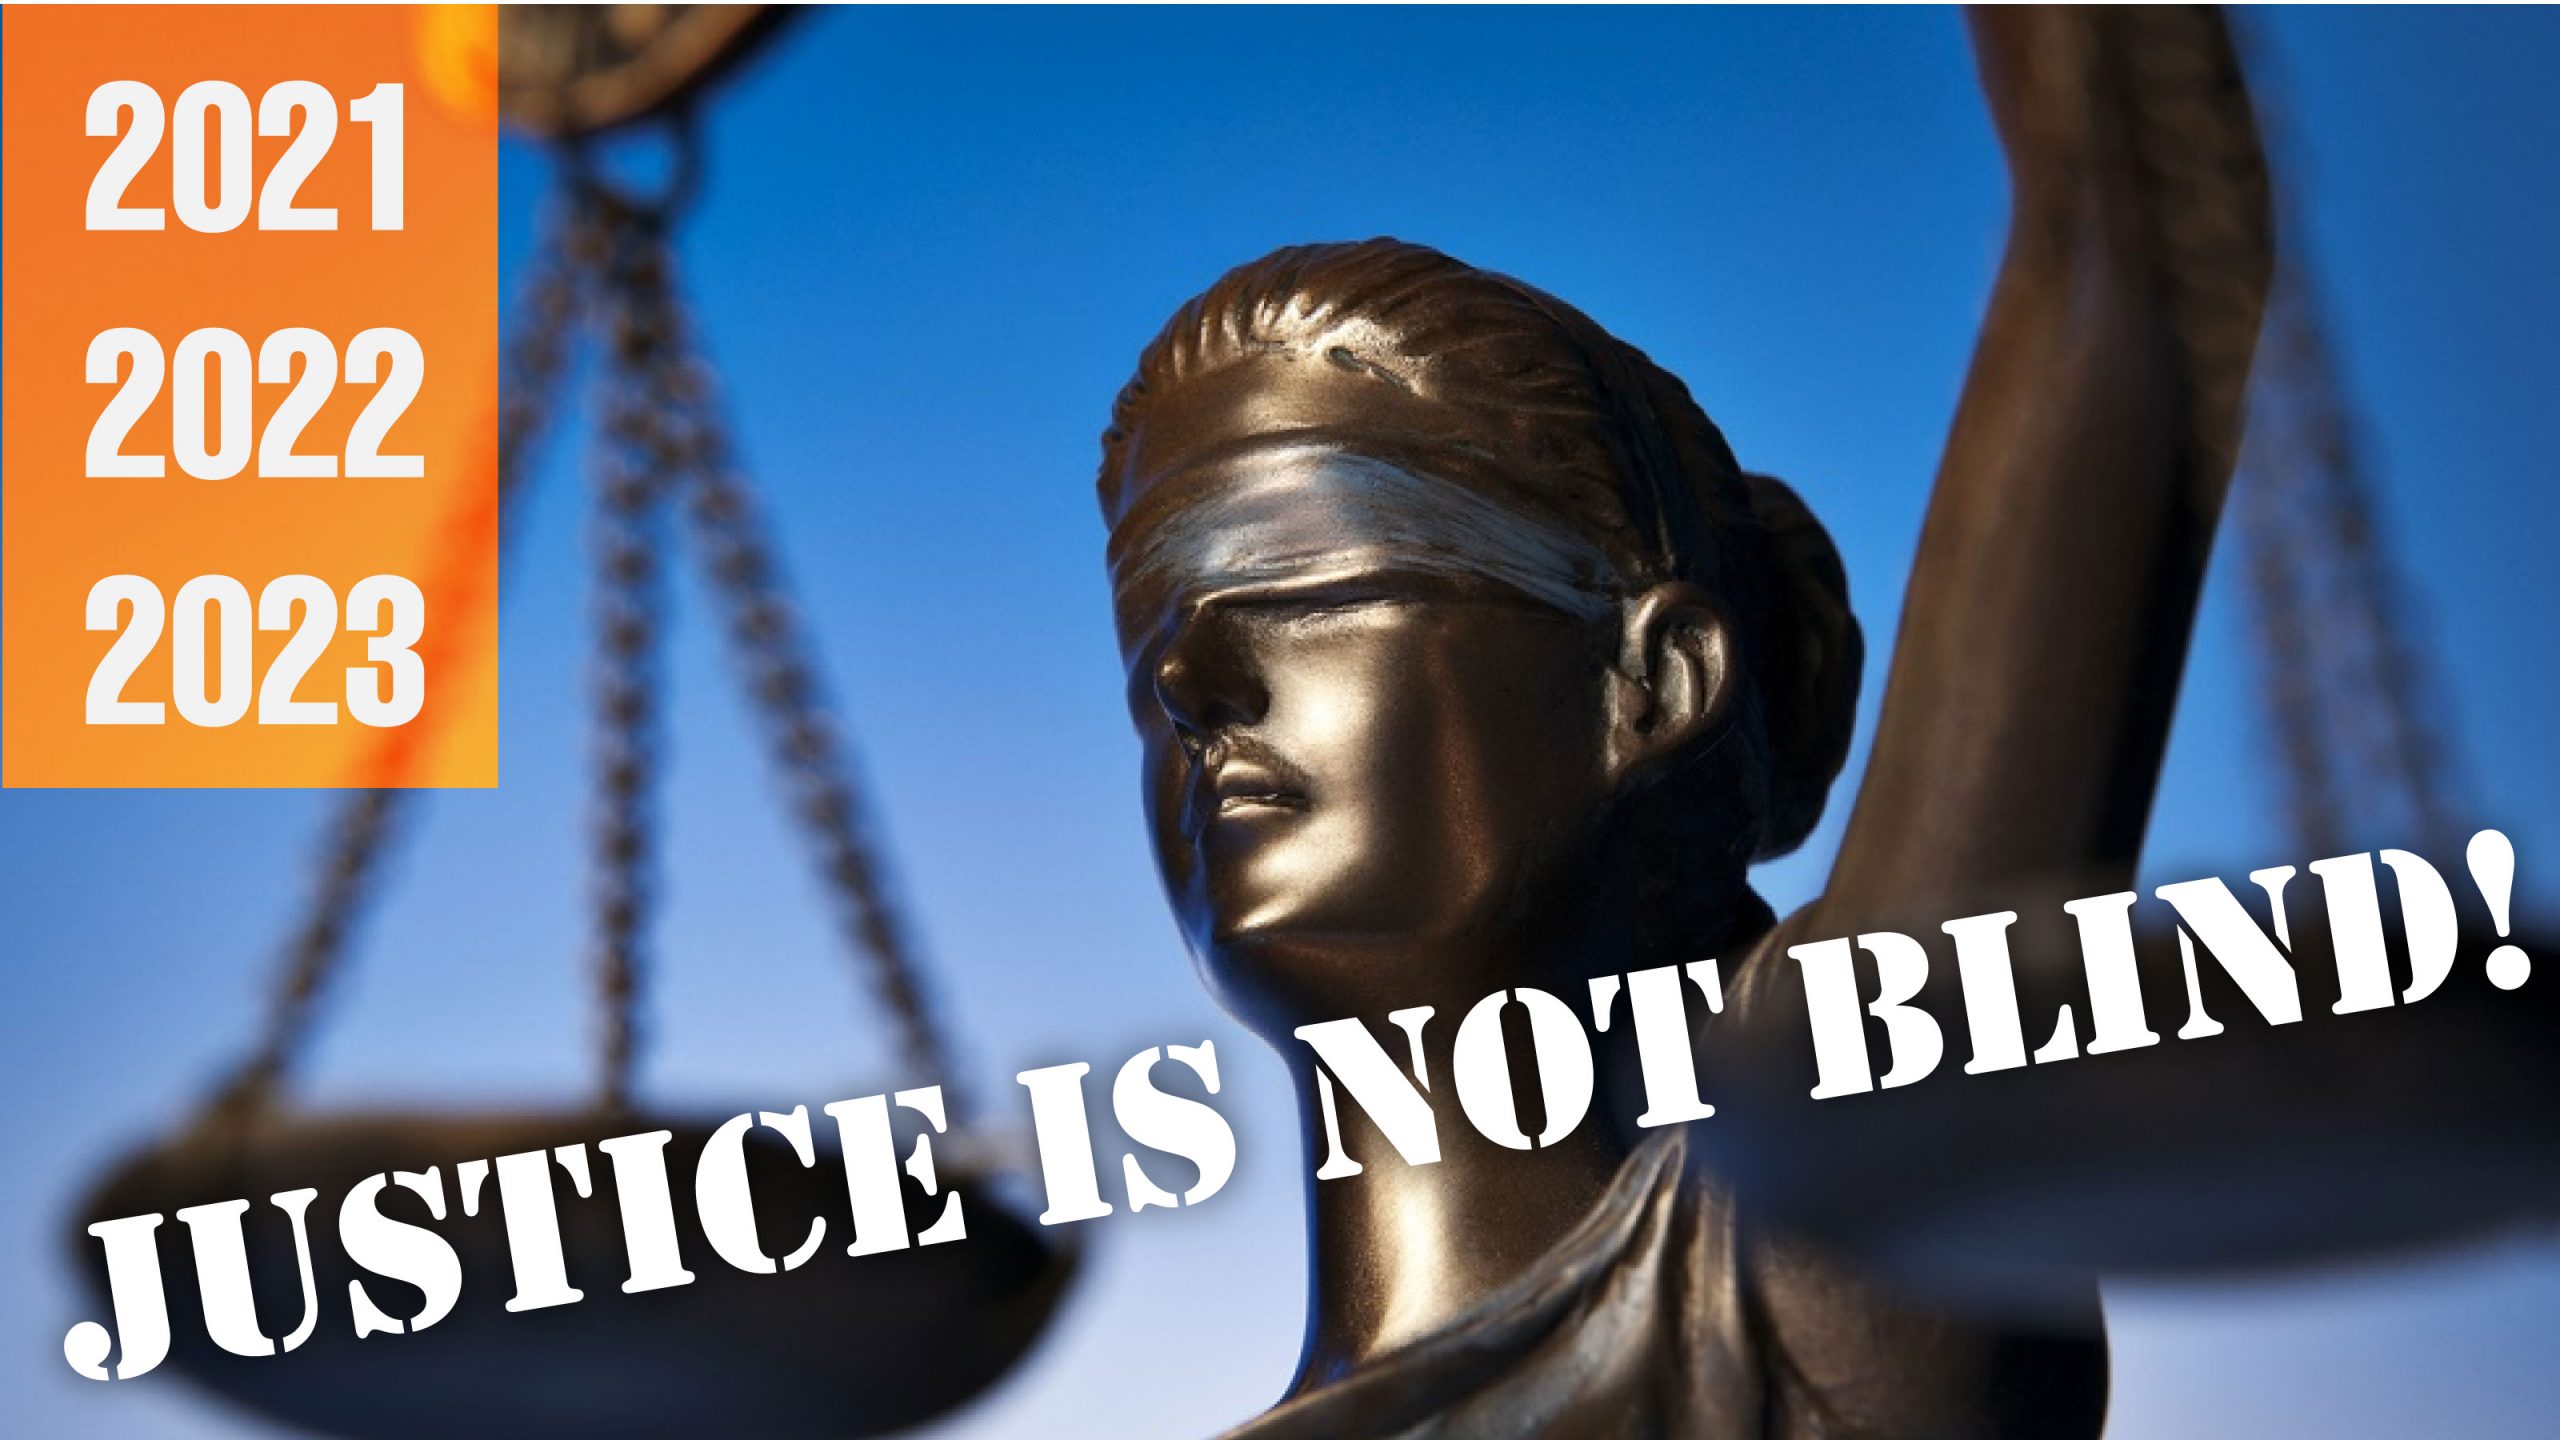 Justice is not blinds